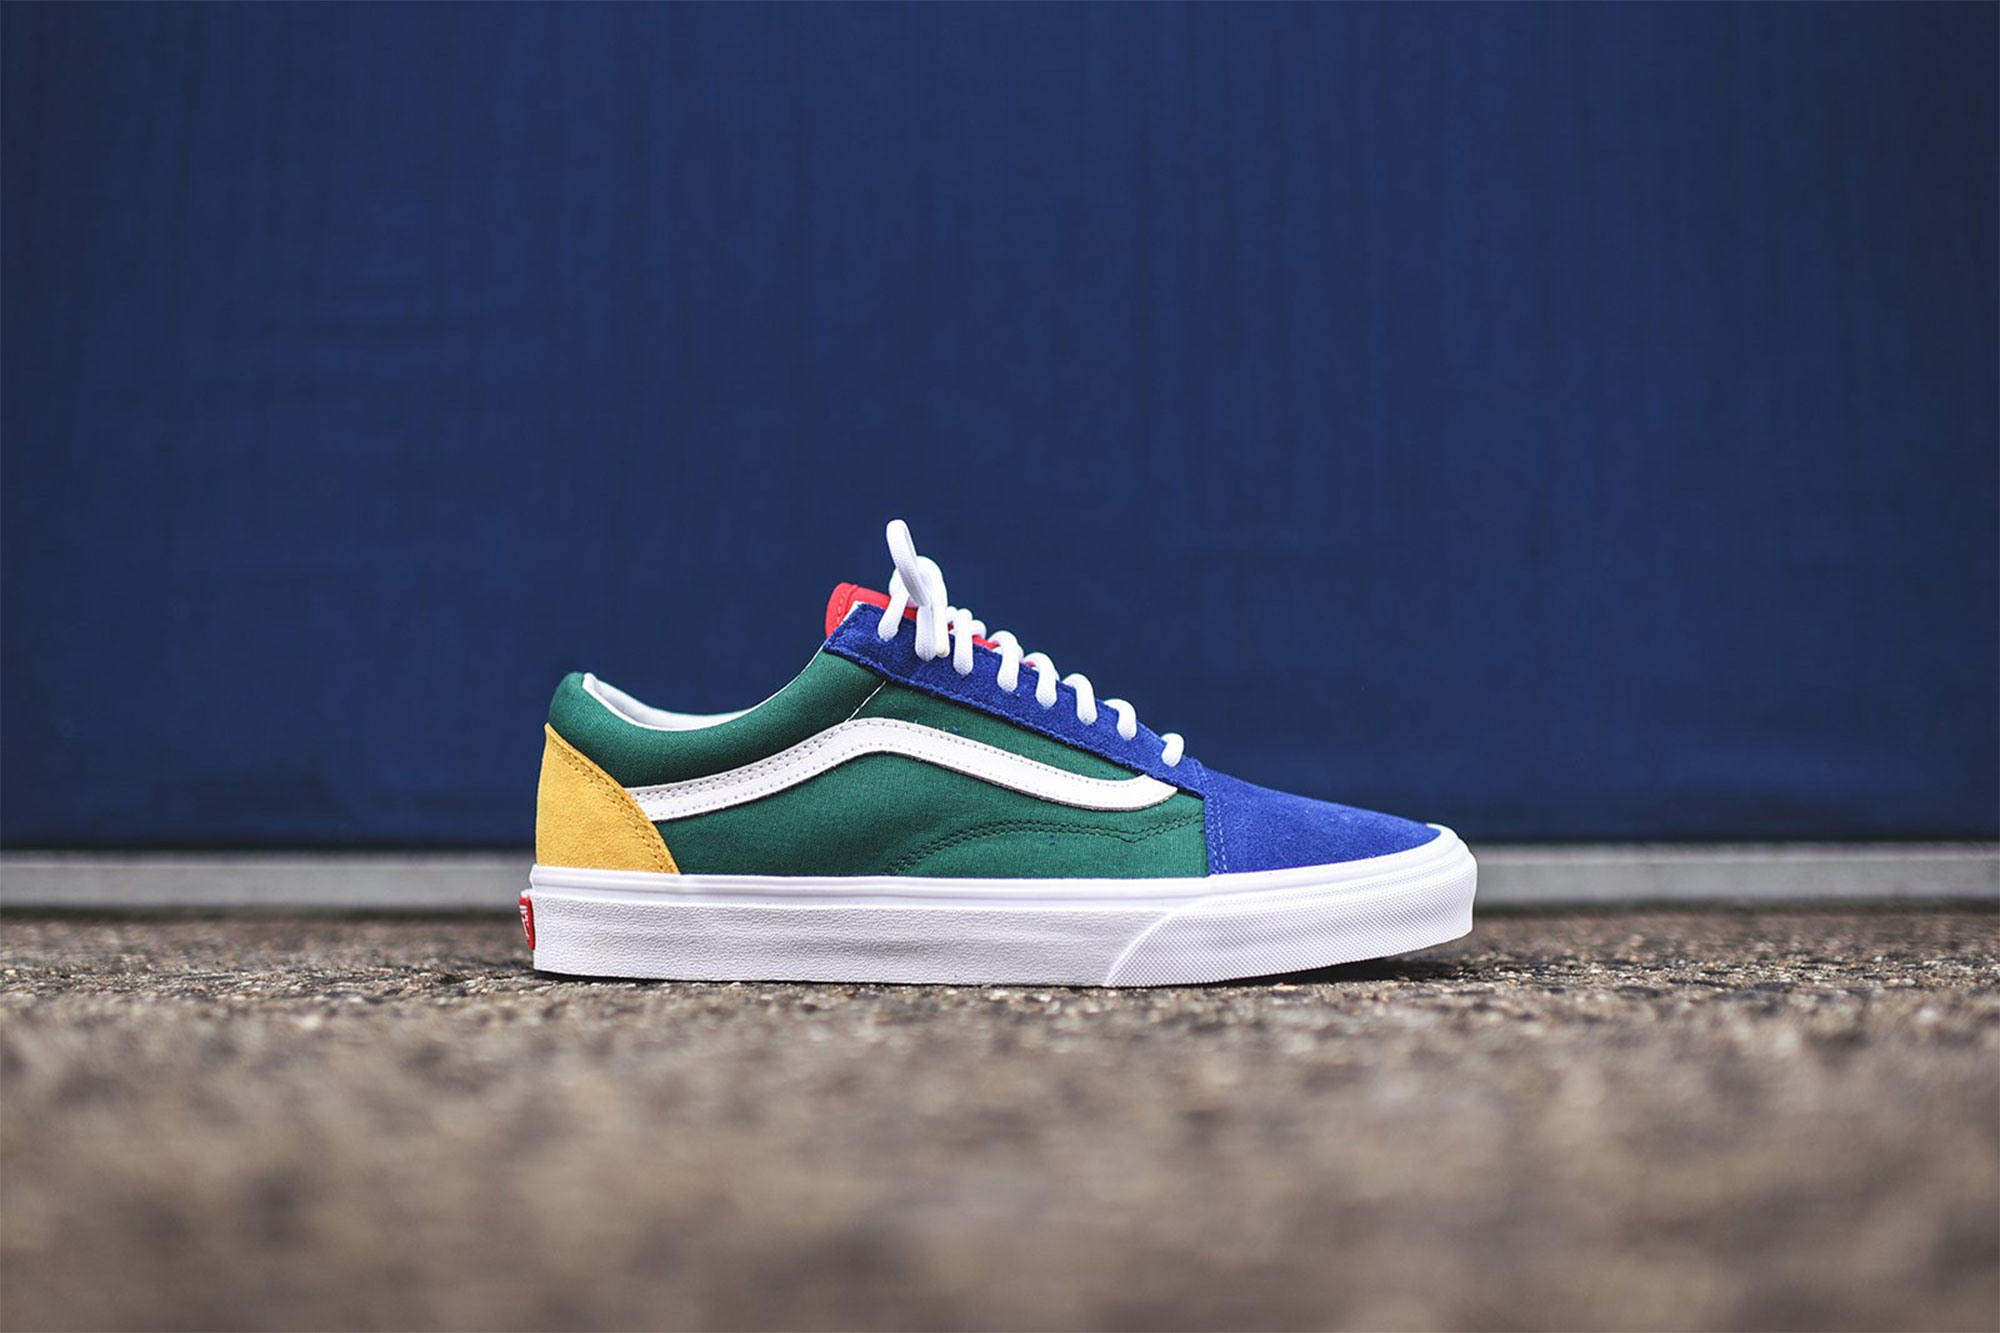 The Vans Yacht Club Pack - The Everyday Man